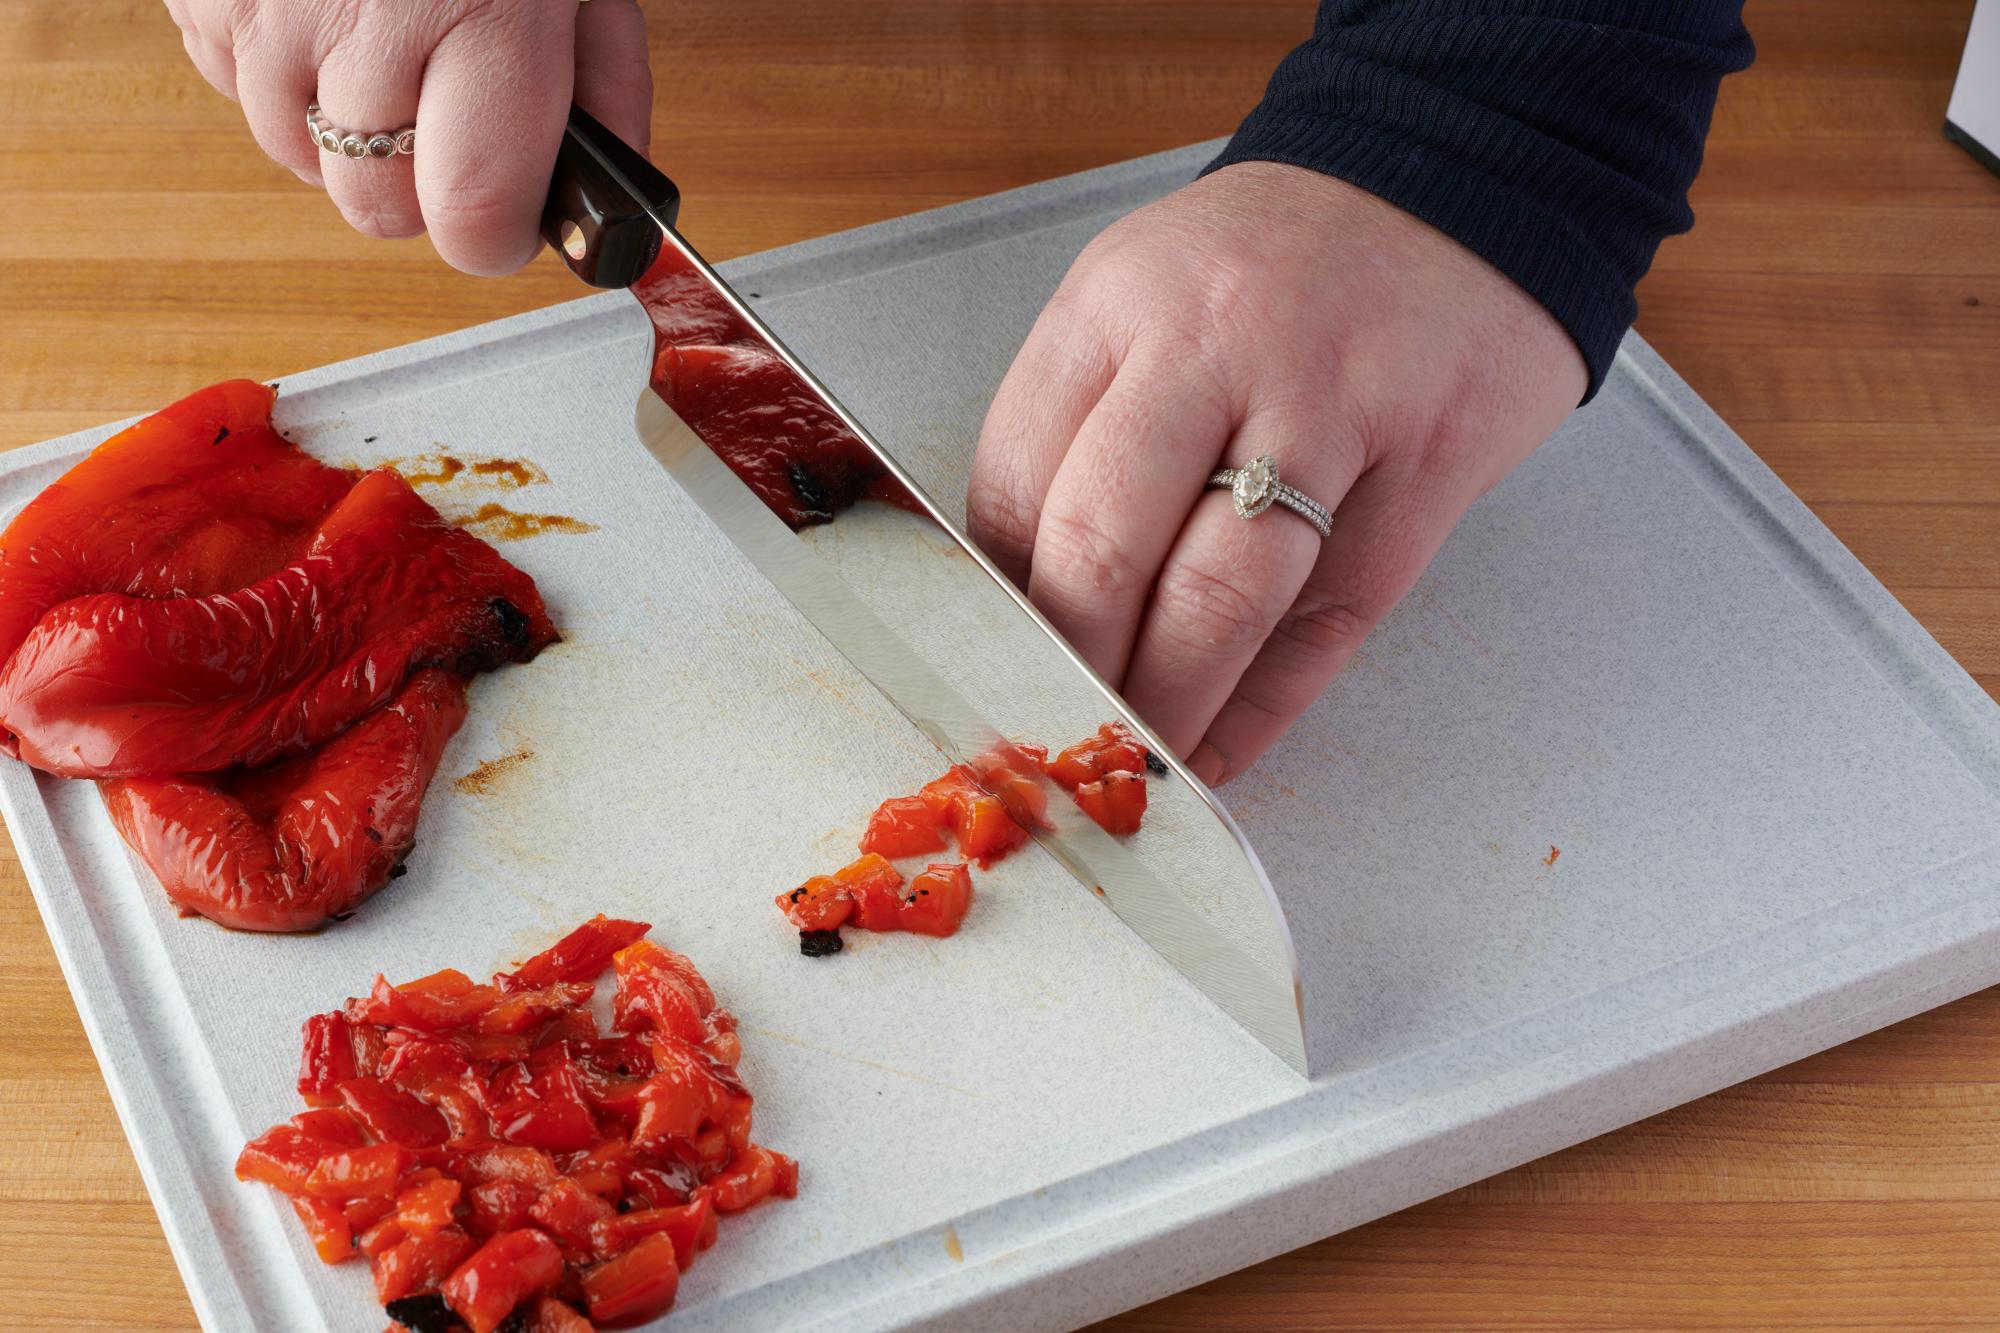 Slicing the red peppers with a Santoku.